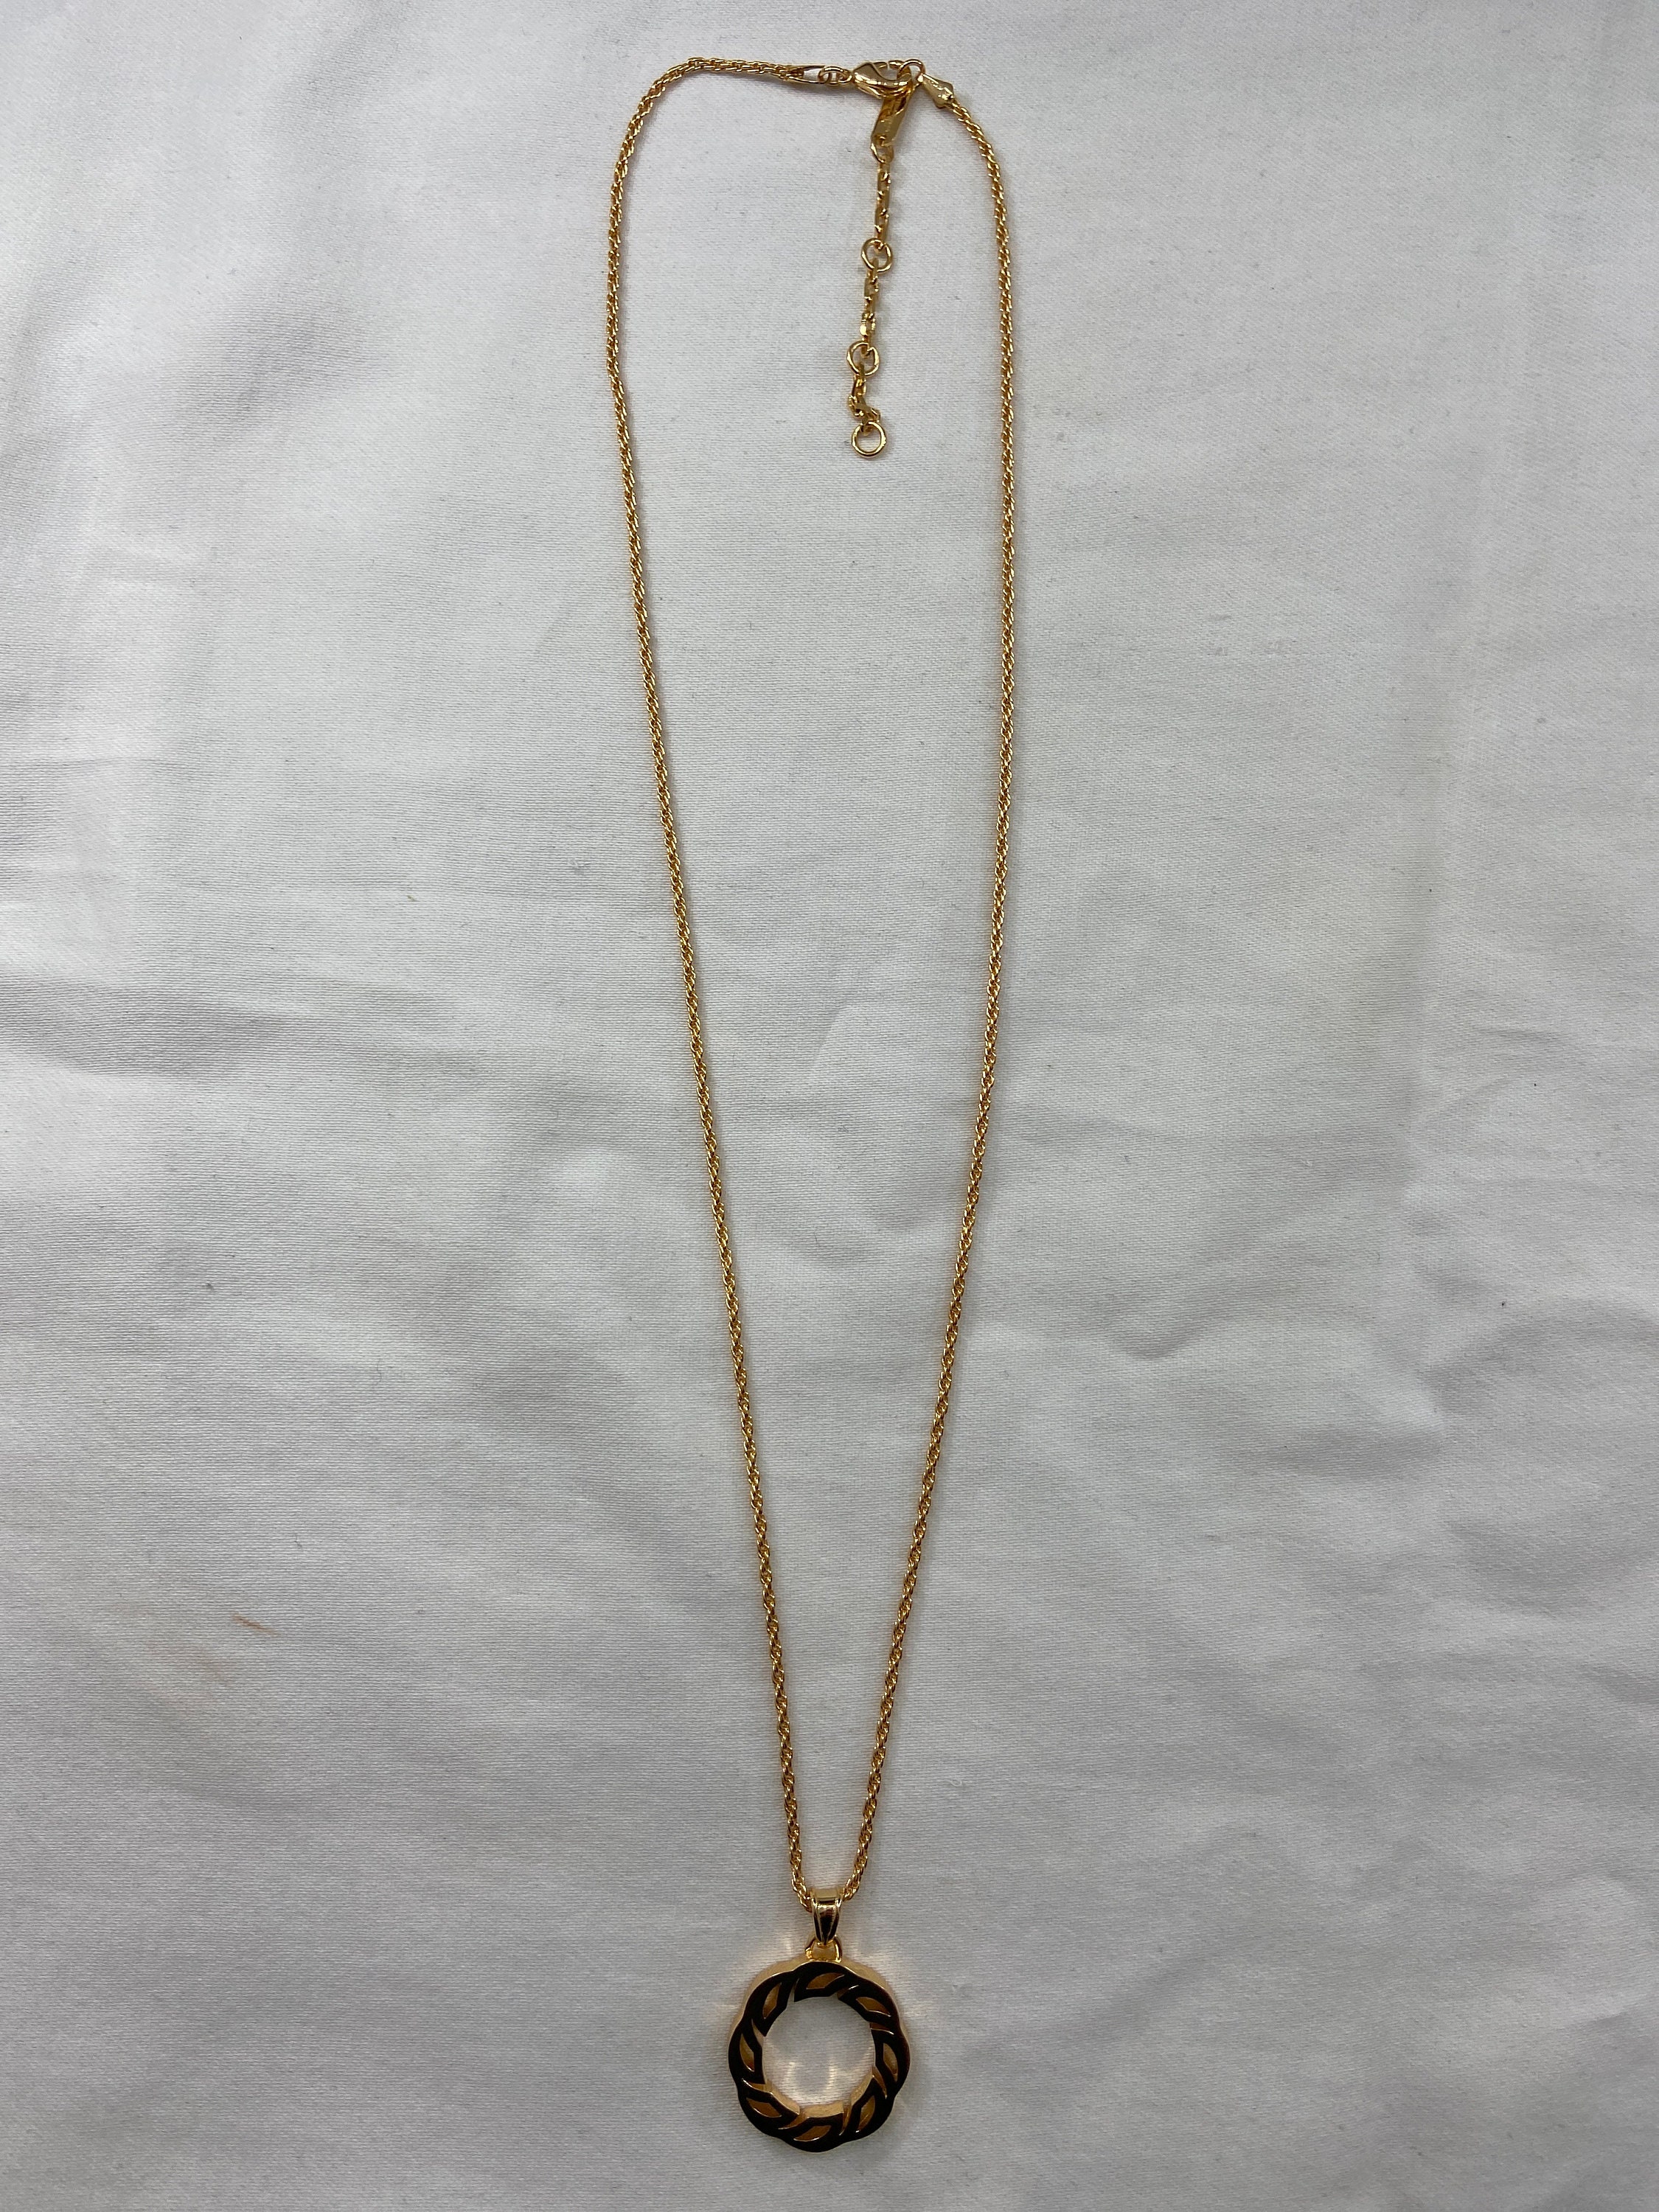 Buy Cheap Gucci necklaces #9999926385 from